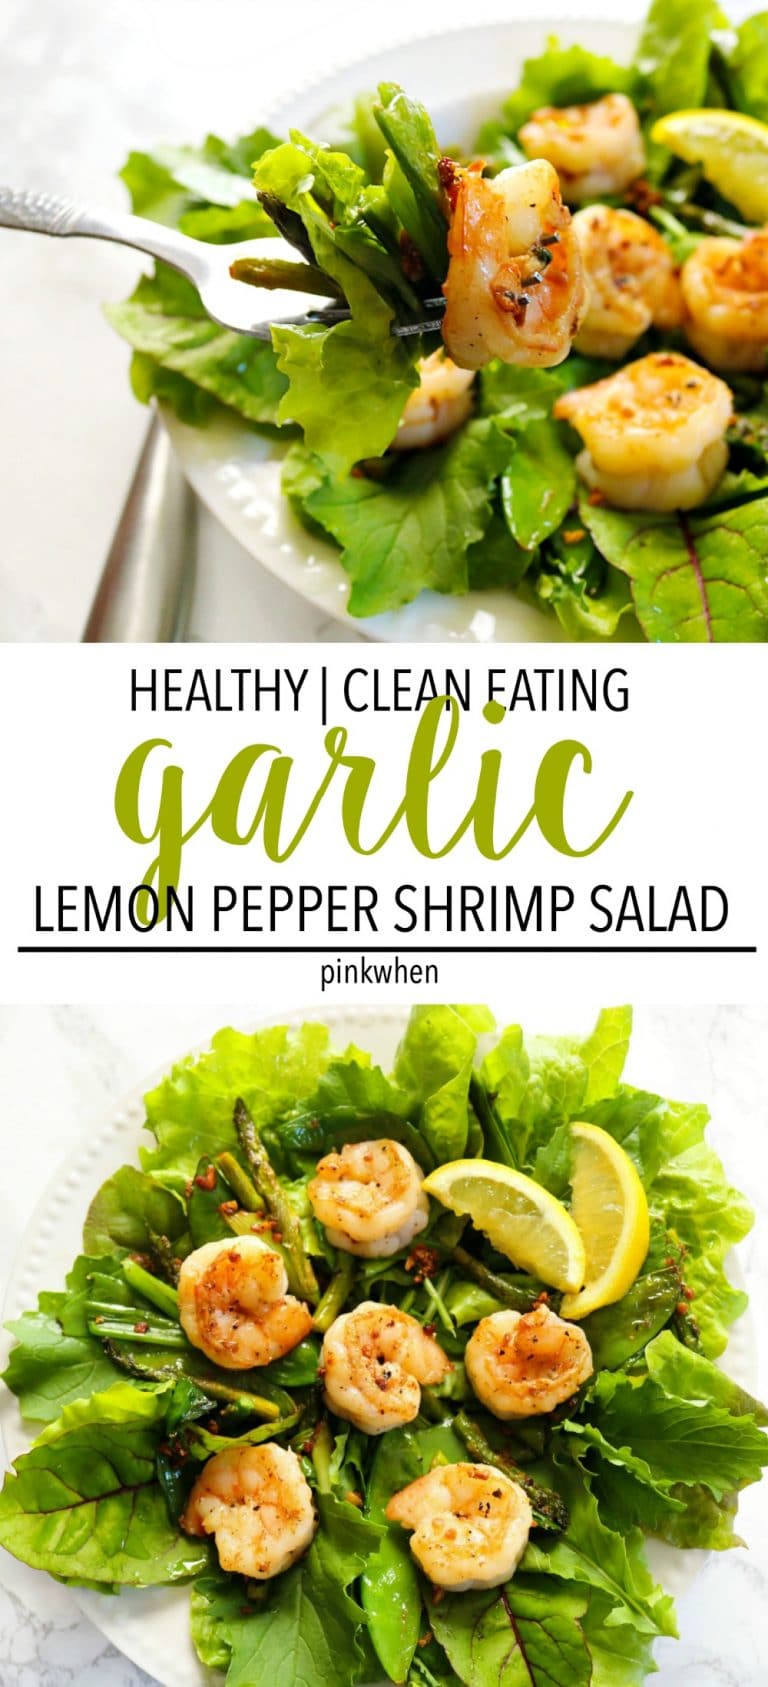 Garlic Lemon Pepper Shrimp Salad - A quick and easy clean eating lunch or dinner recipe.